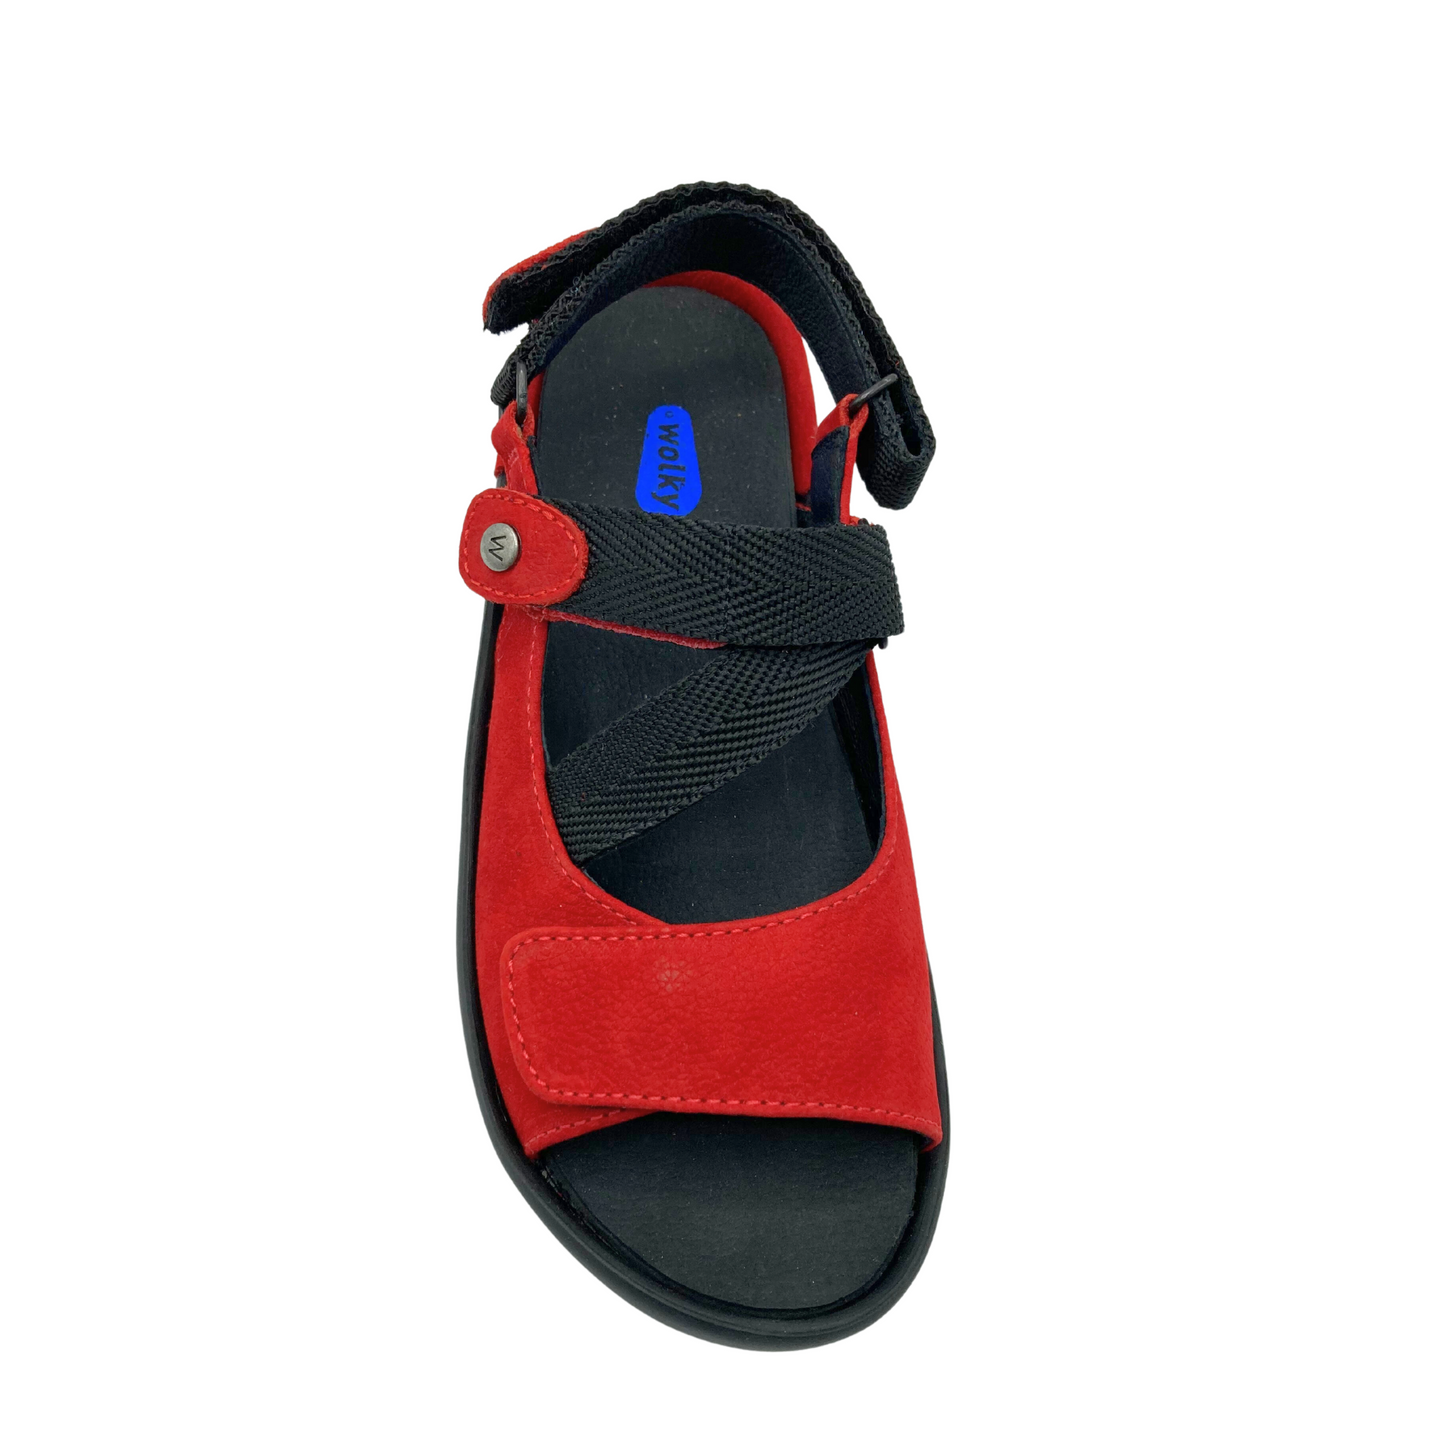 Top down view of a red leaher sandal.  Fully adjustable - velcro at front strap, cross over strap at midfoot pulls tight at outside, heel strap has velcro adjustment